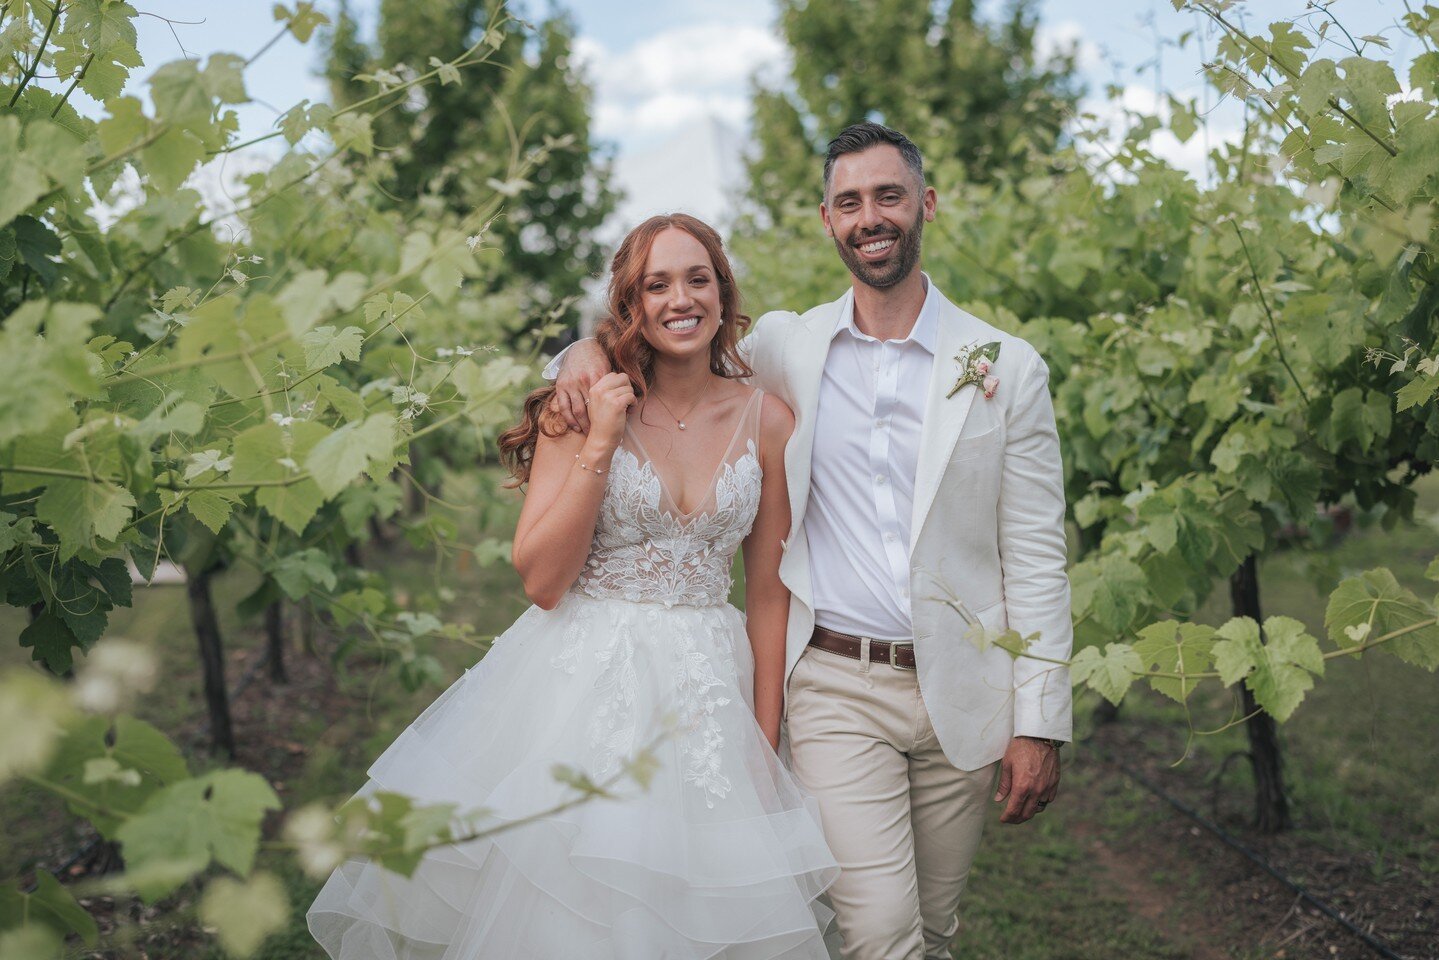 Jack &amp; Chloes wedding was filled with giggles, laughter, and a whole lot of mischief. This high energy duo tied the knot at The Vinegrove in Mudgee.